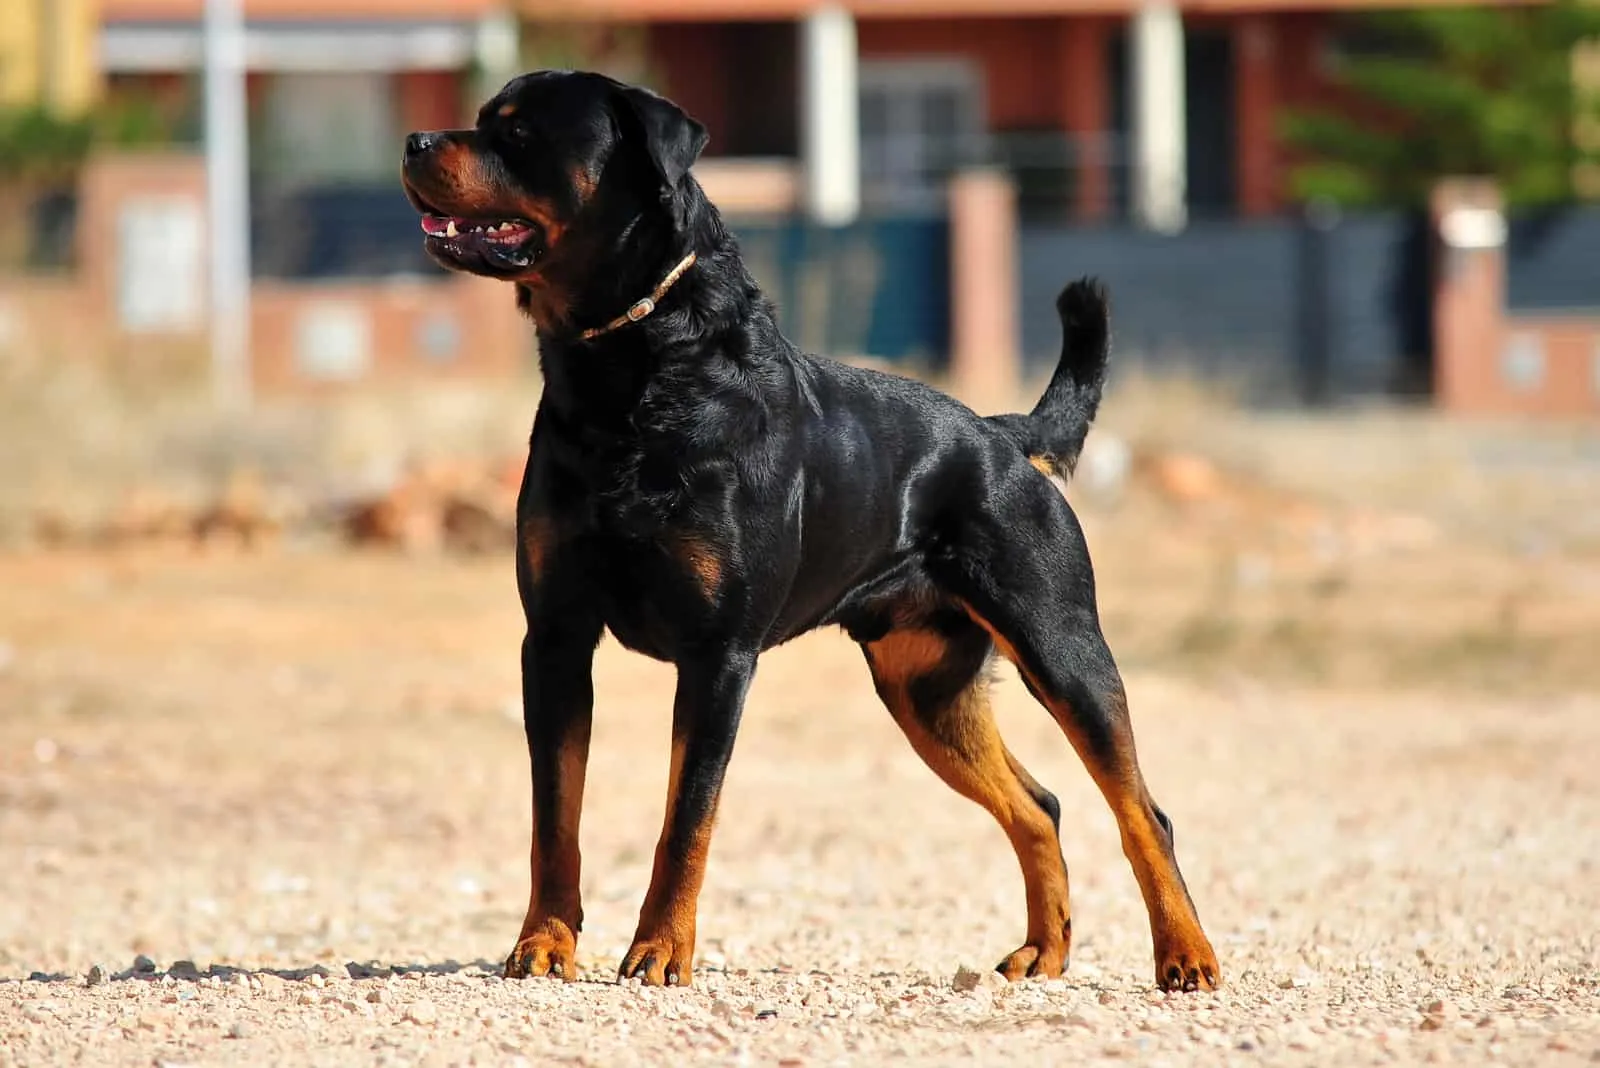 a powerful Rottweiler stands outside on the macadam